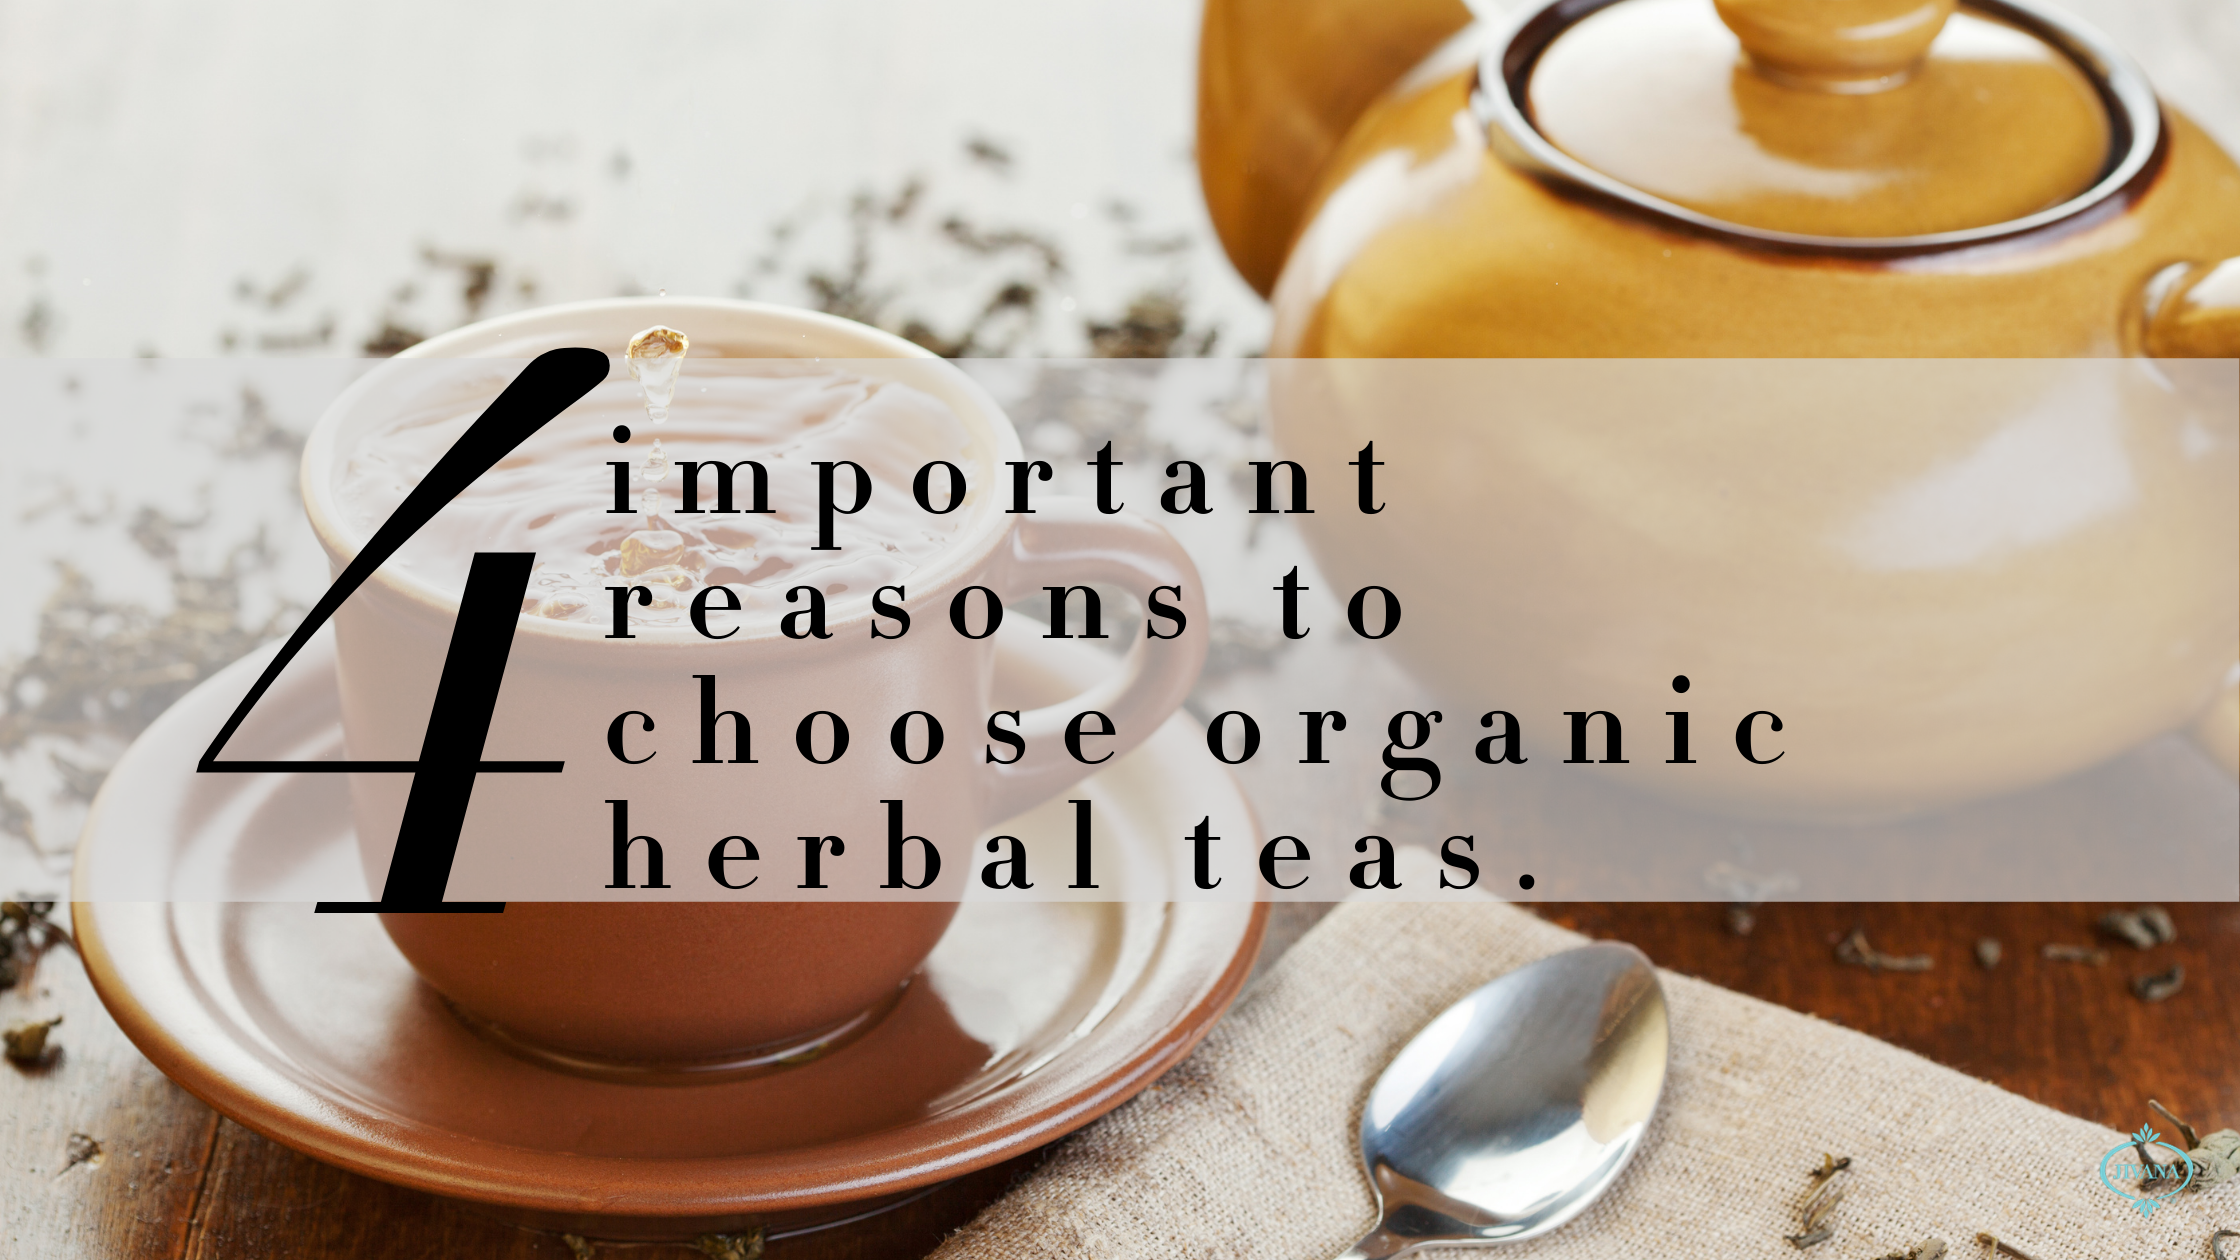 Why its important to choose organic teas